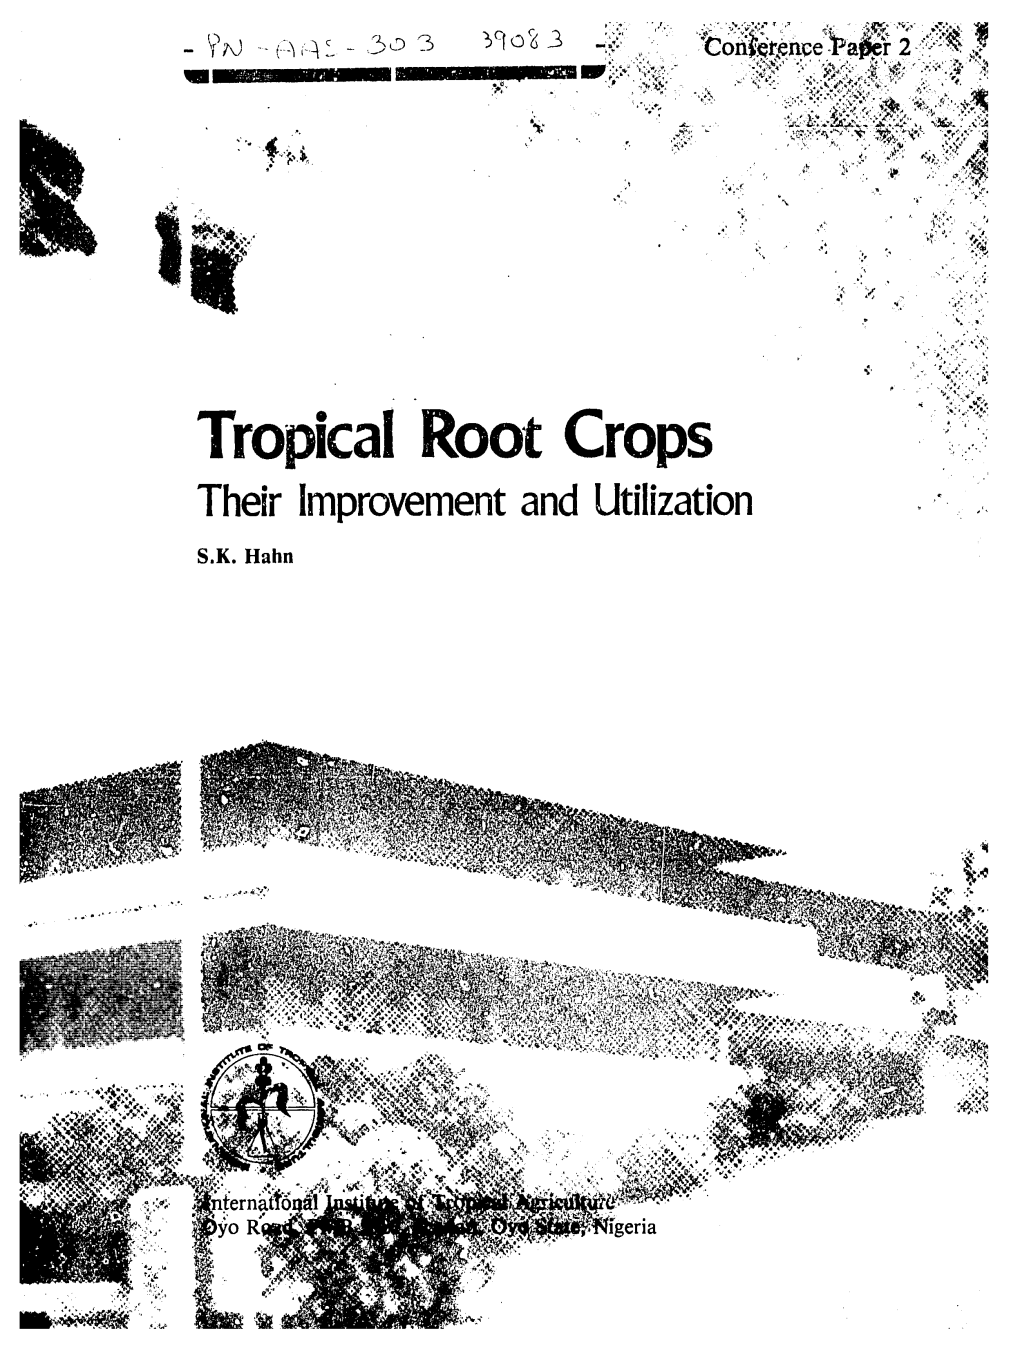 Tropical Root Crops Their Improvement and Utilization